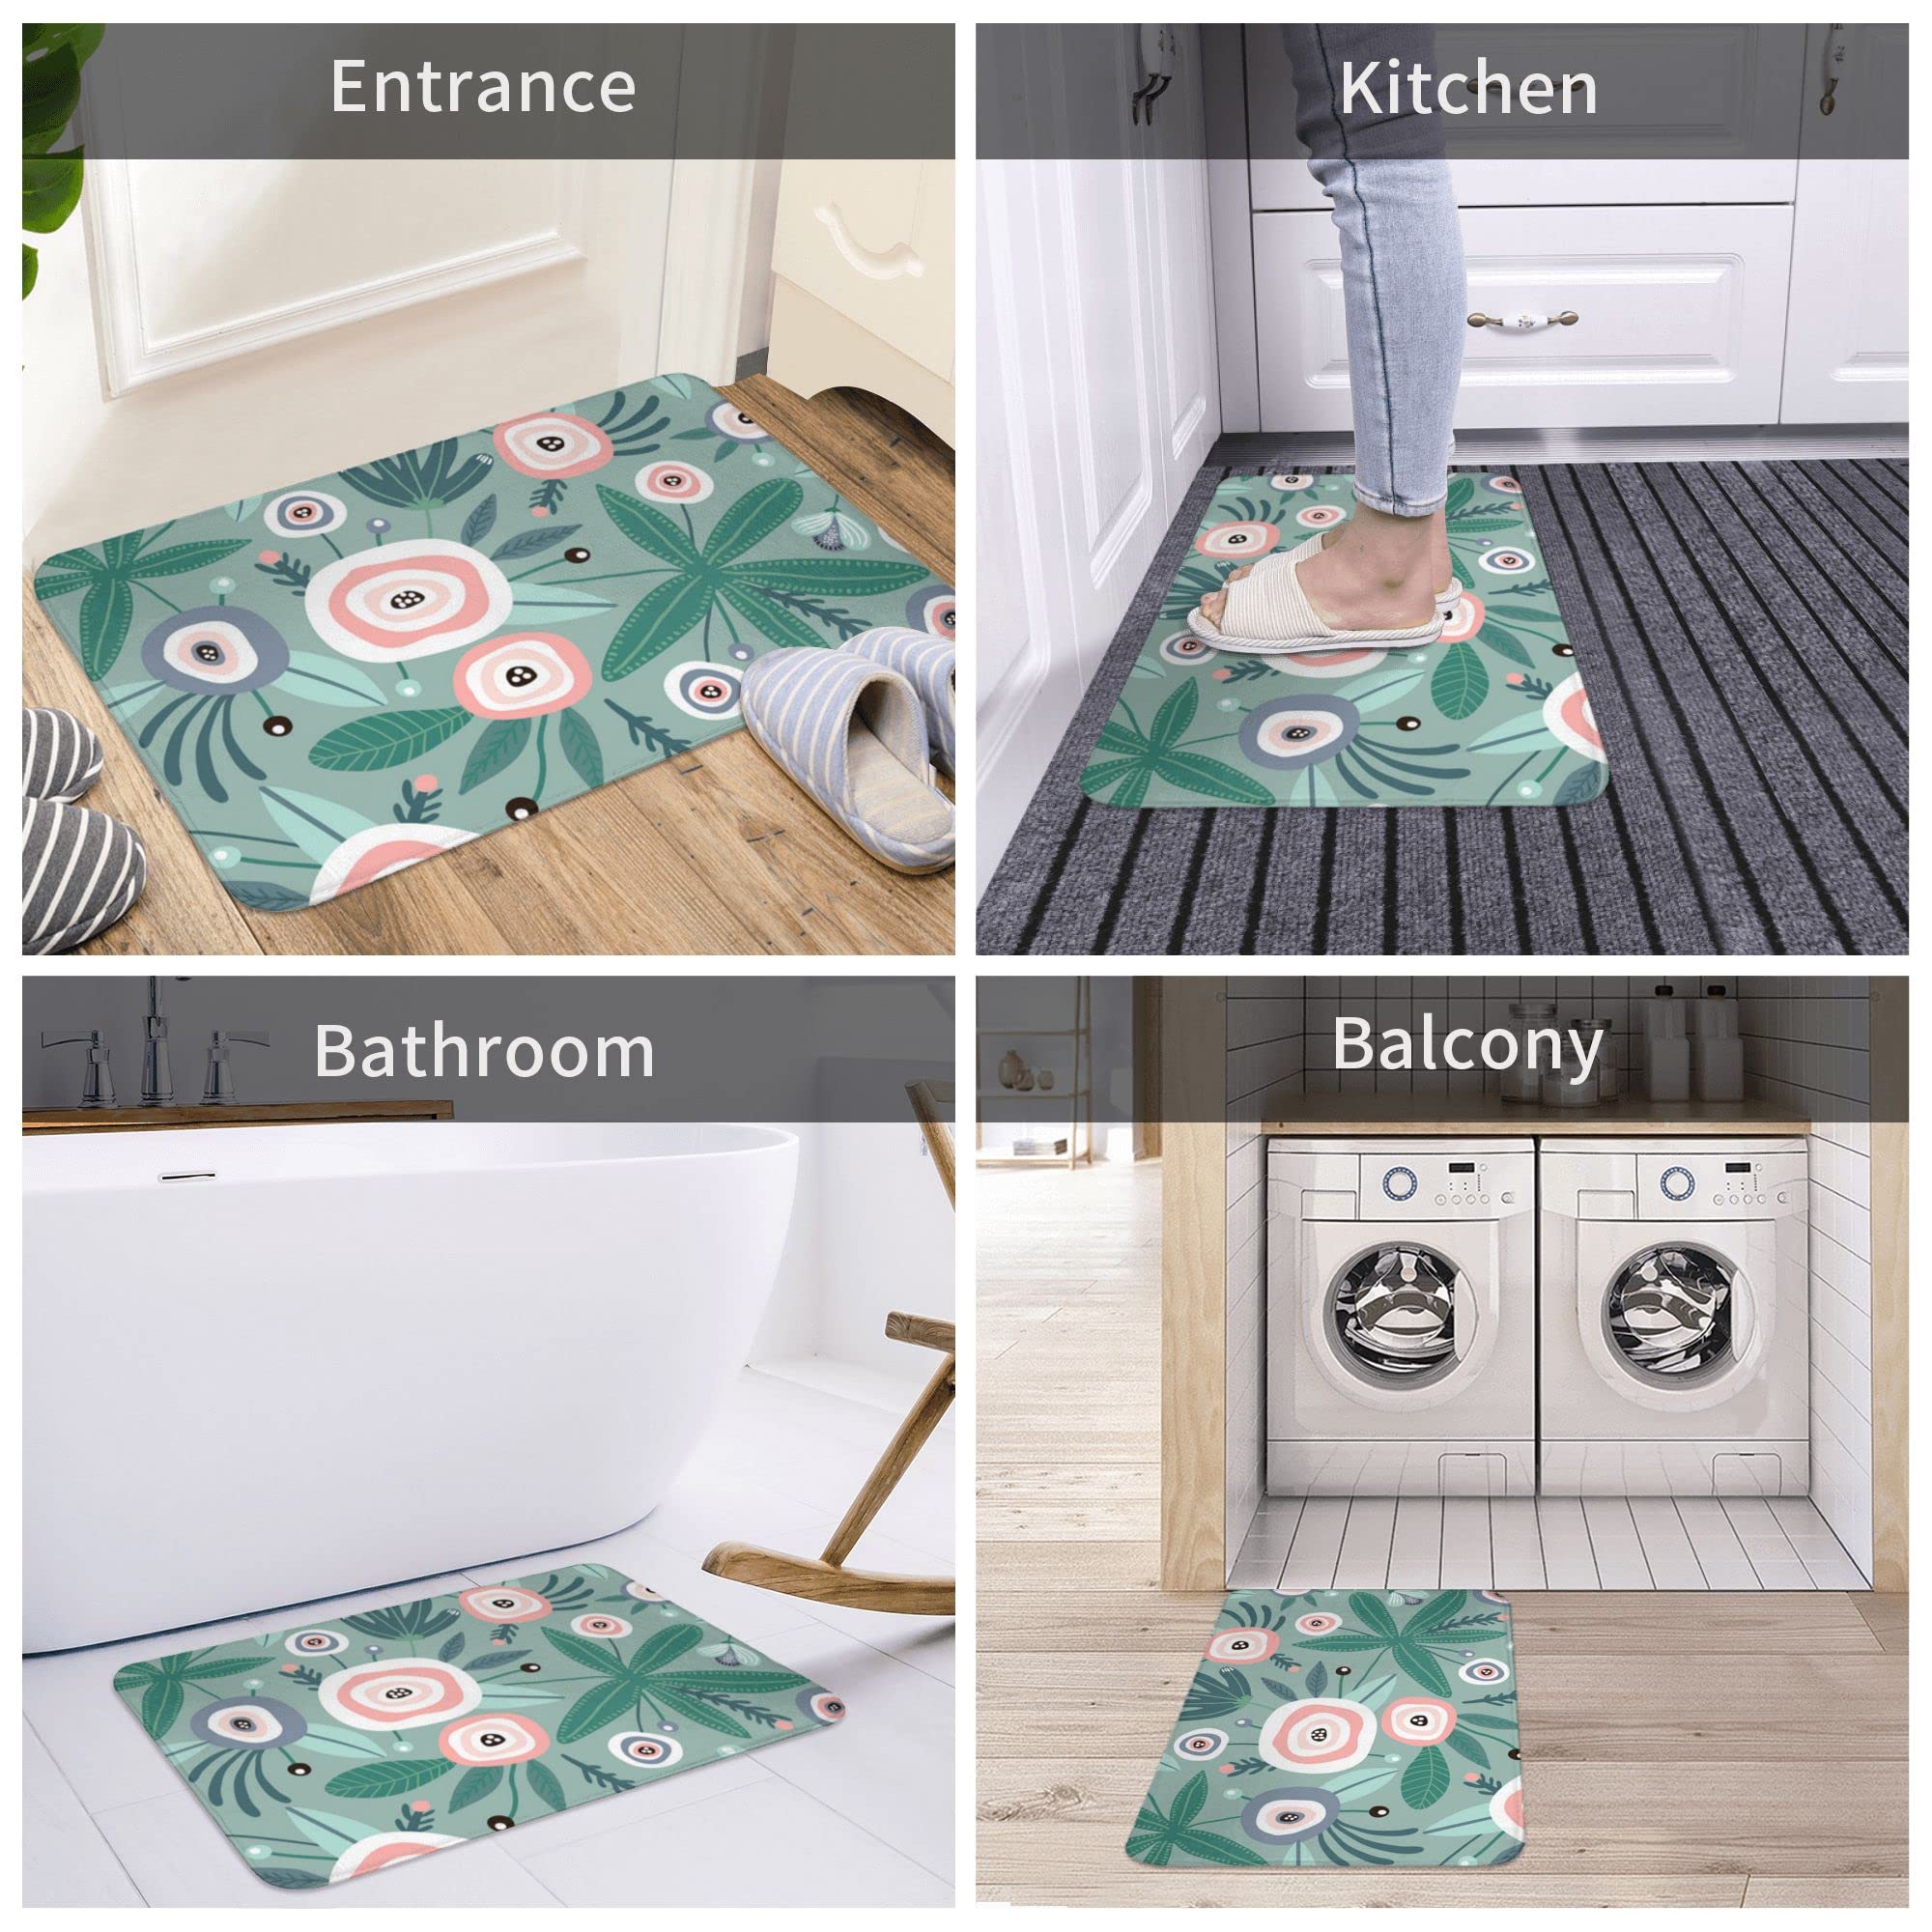 Sunflowers and Butterfly Art Print Indoor Doormat Bath Rugs Non Slip, Washable Cover Floor Rug Absorbent Carpets Floor Mat Home Decor for Kitchen (16x24)